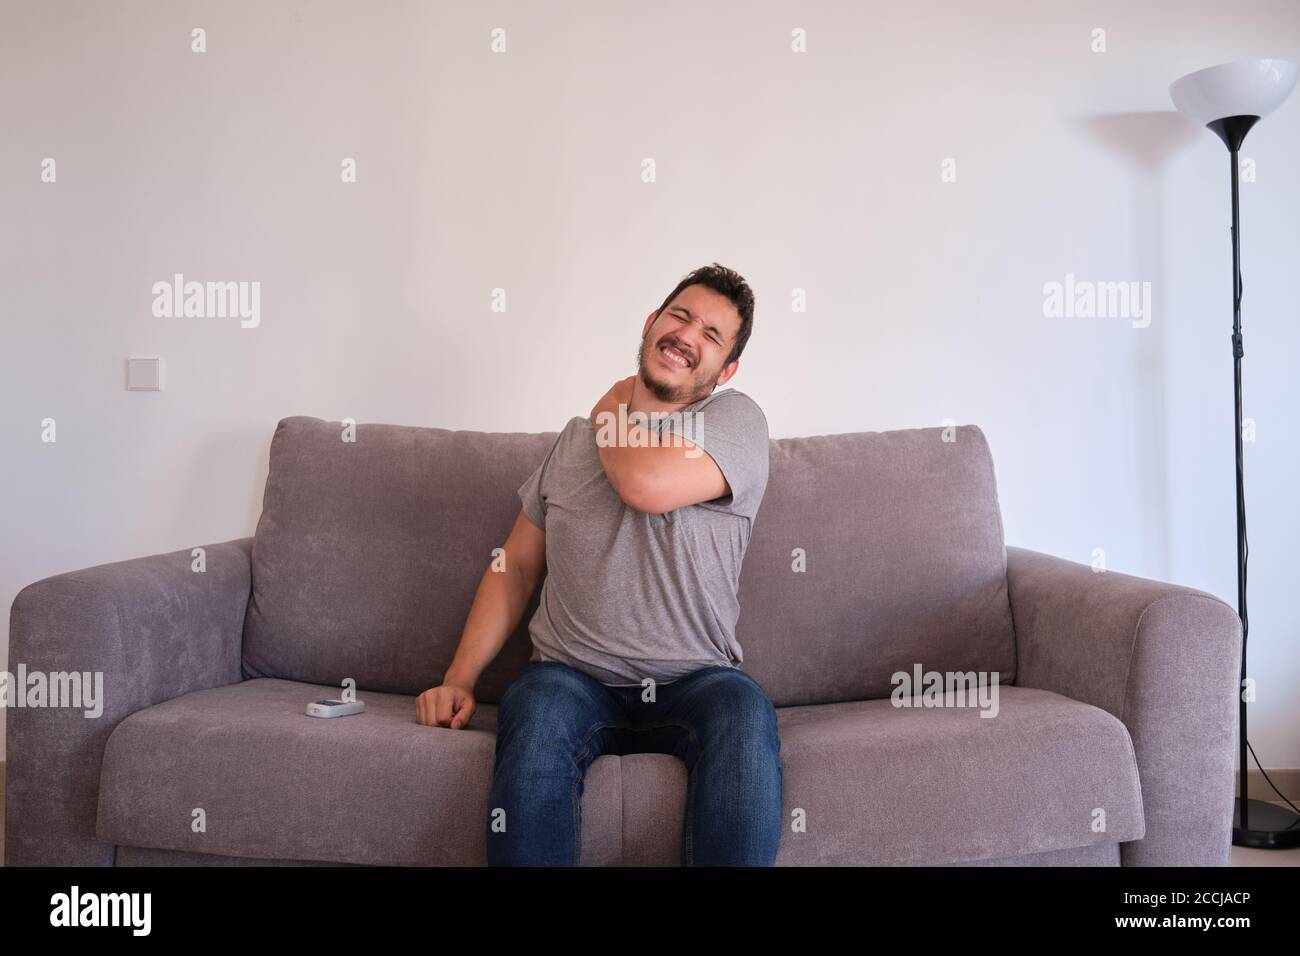 Young man sitting on a sofa suffering from neck pain. Neck and shoulder paint. Stock Photo